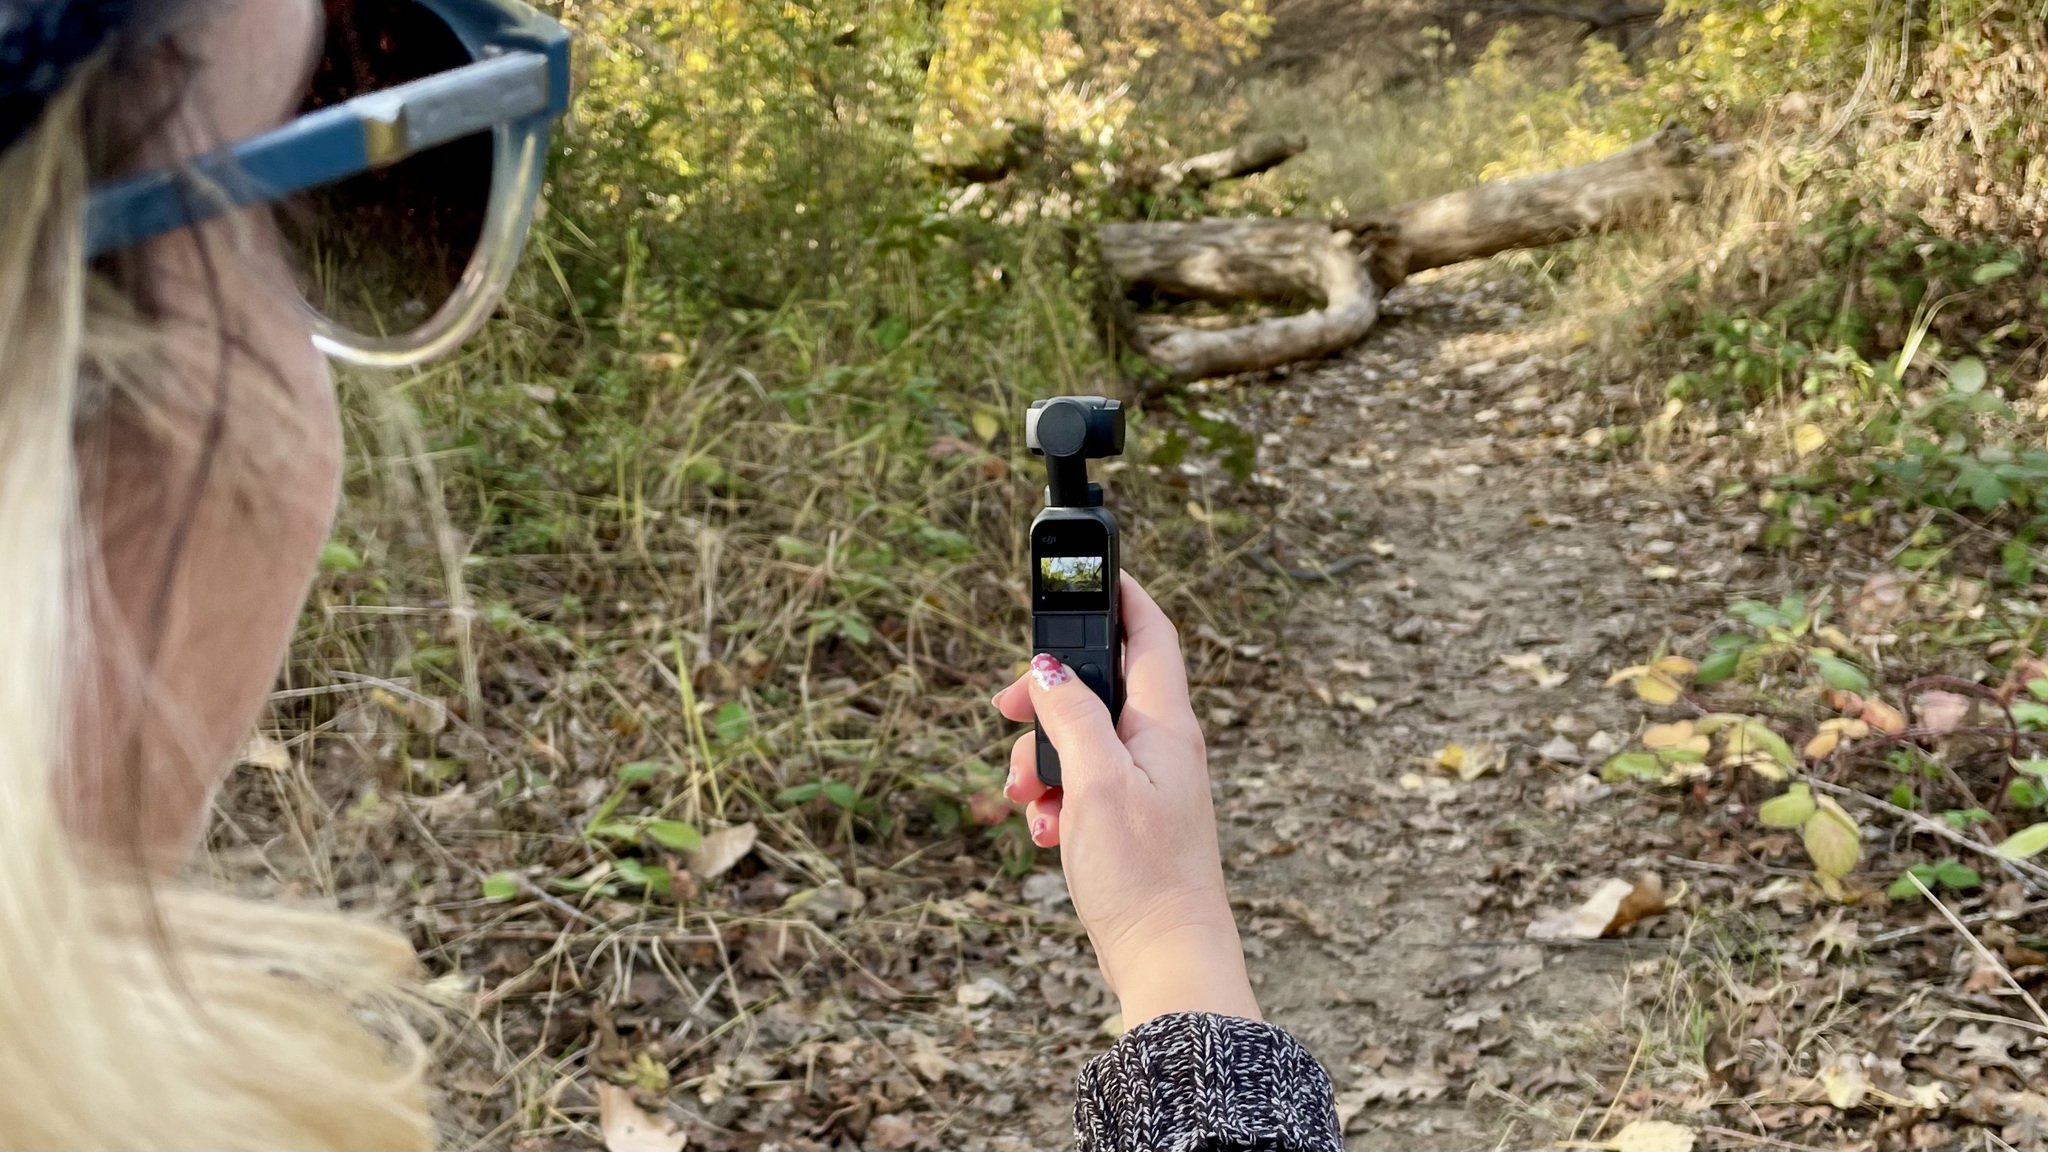 DJI Pocket 2 review: Tiniest pro quality camera ever   iMore